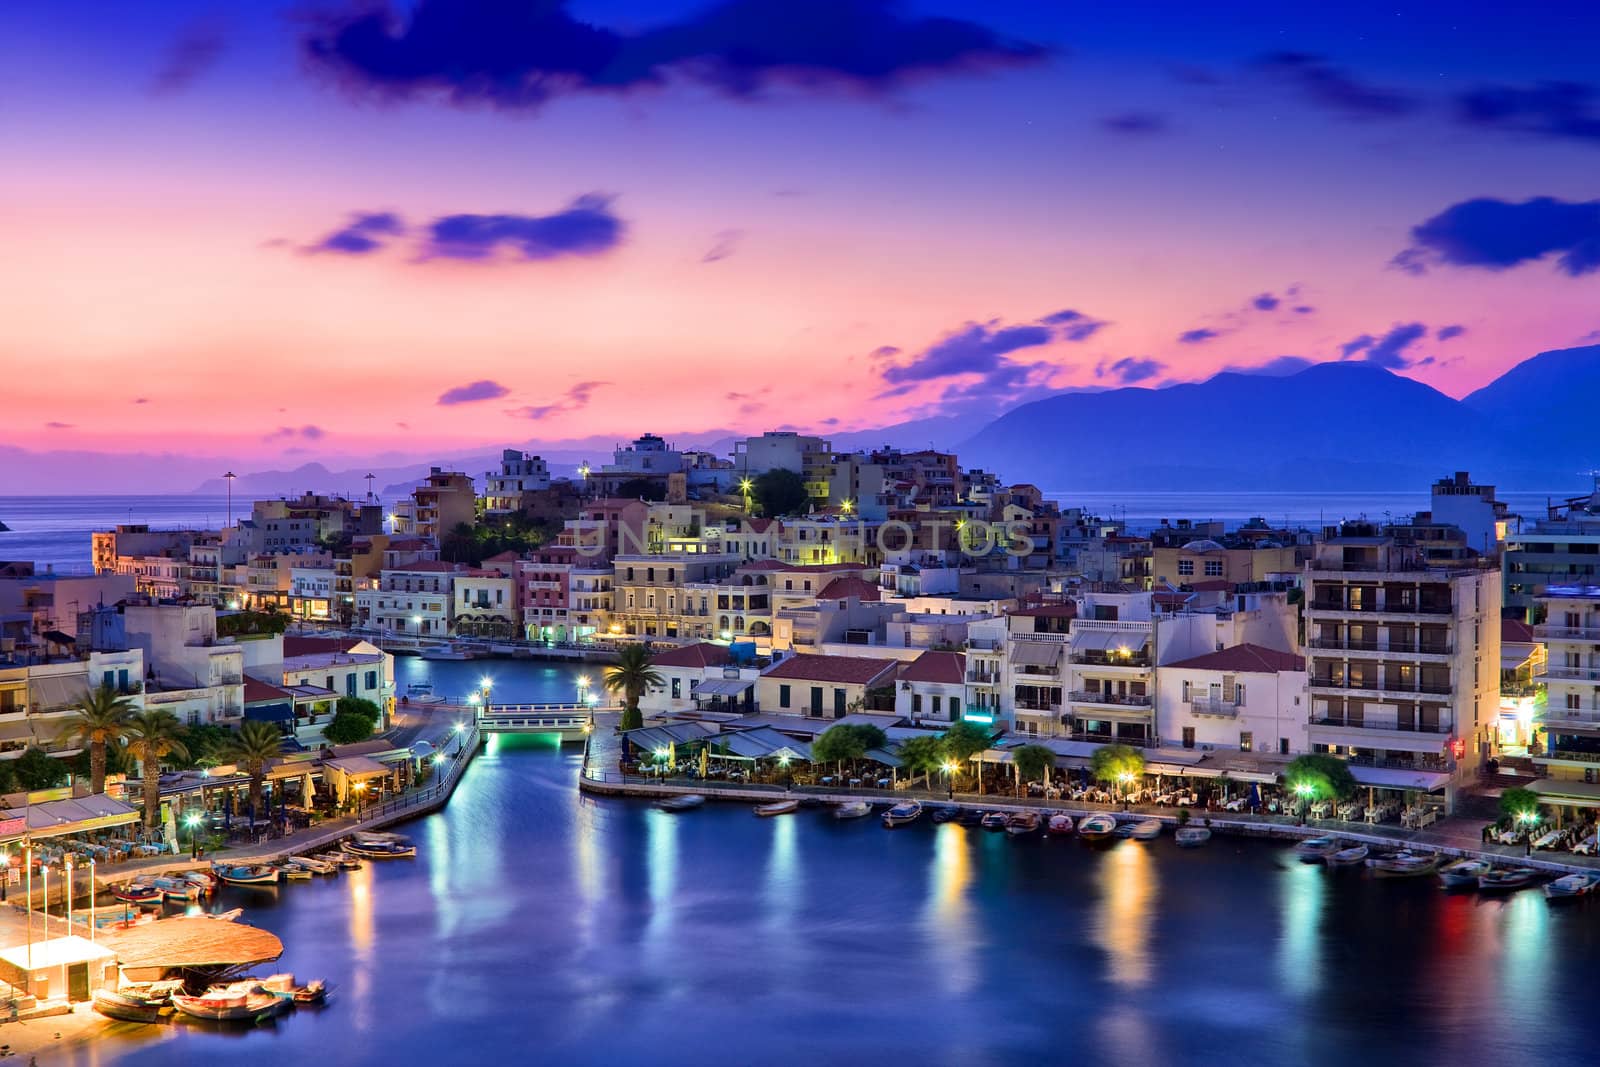 Agios Nikolaos. Agios Nikolaos is a picturesque town in the eastern part of the island Crete built on the northwest side of the peaceful bay of Mirabello.